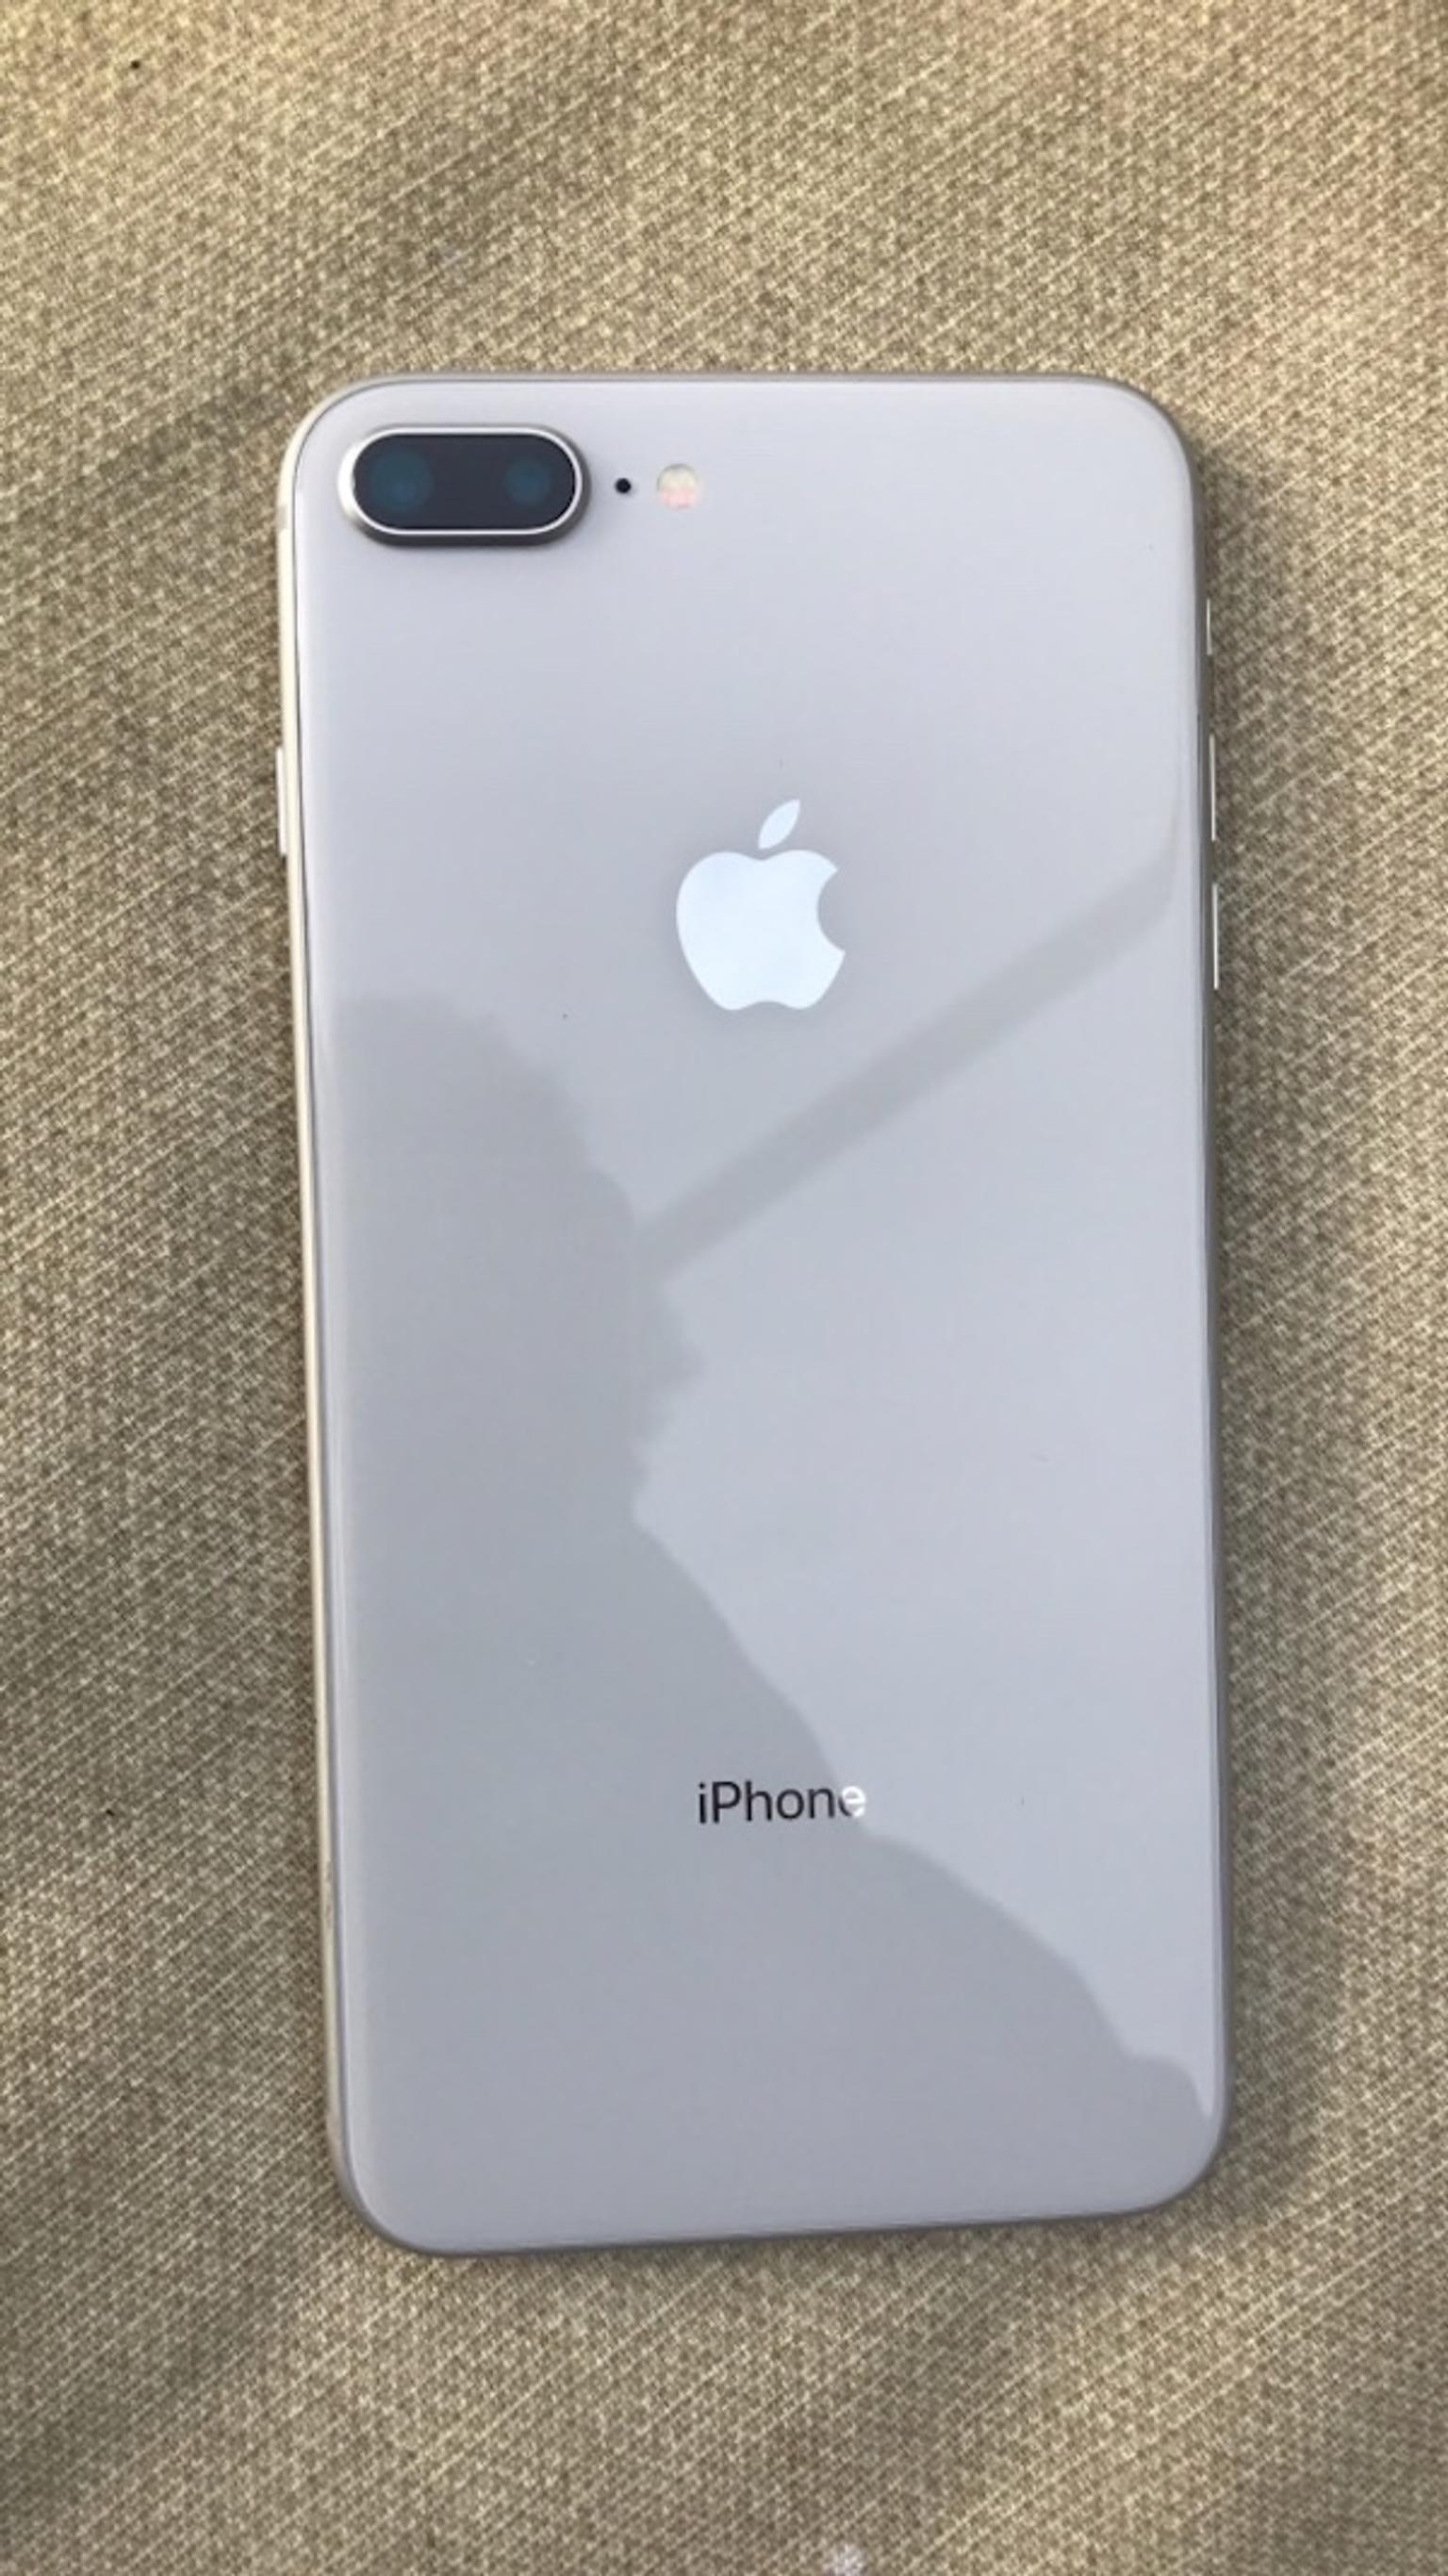 iPhone 8 Plus like new unlocked 64gb white in IG11 London for £440.00 for sale | Shpock